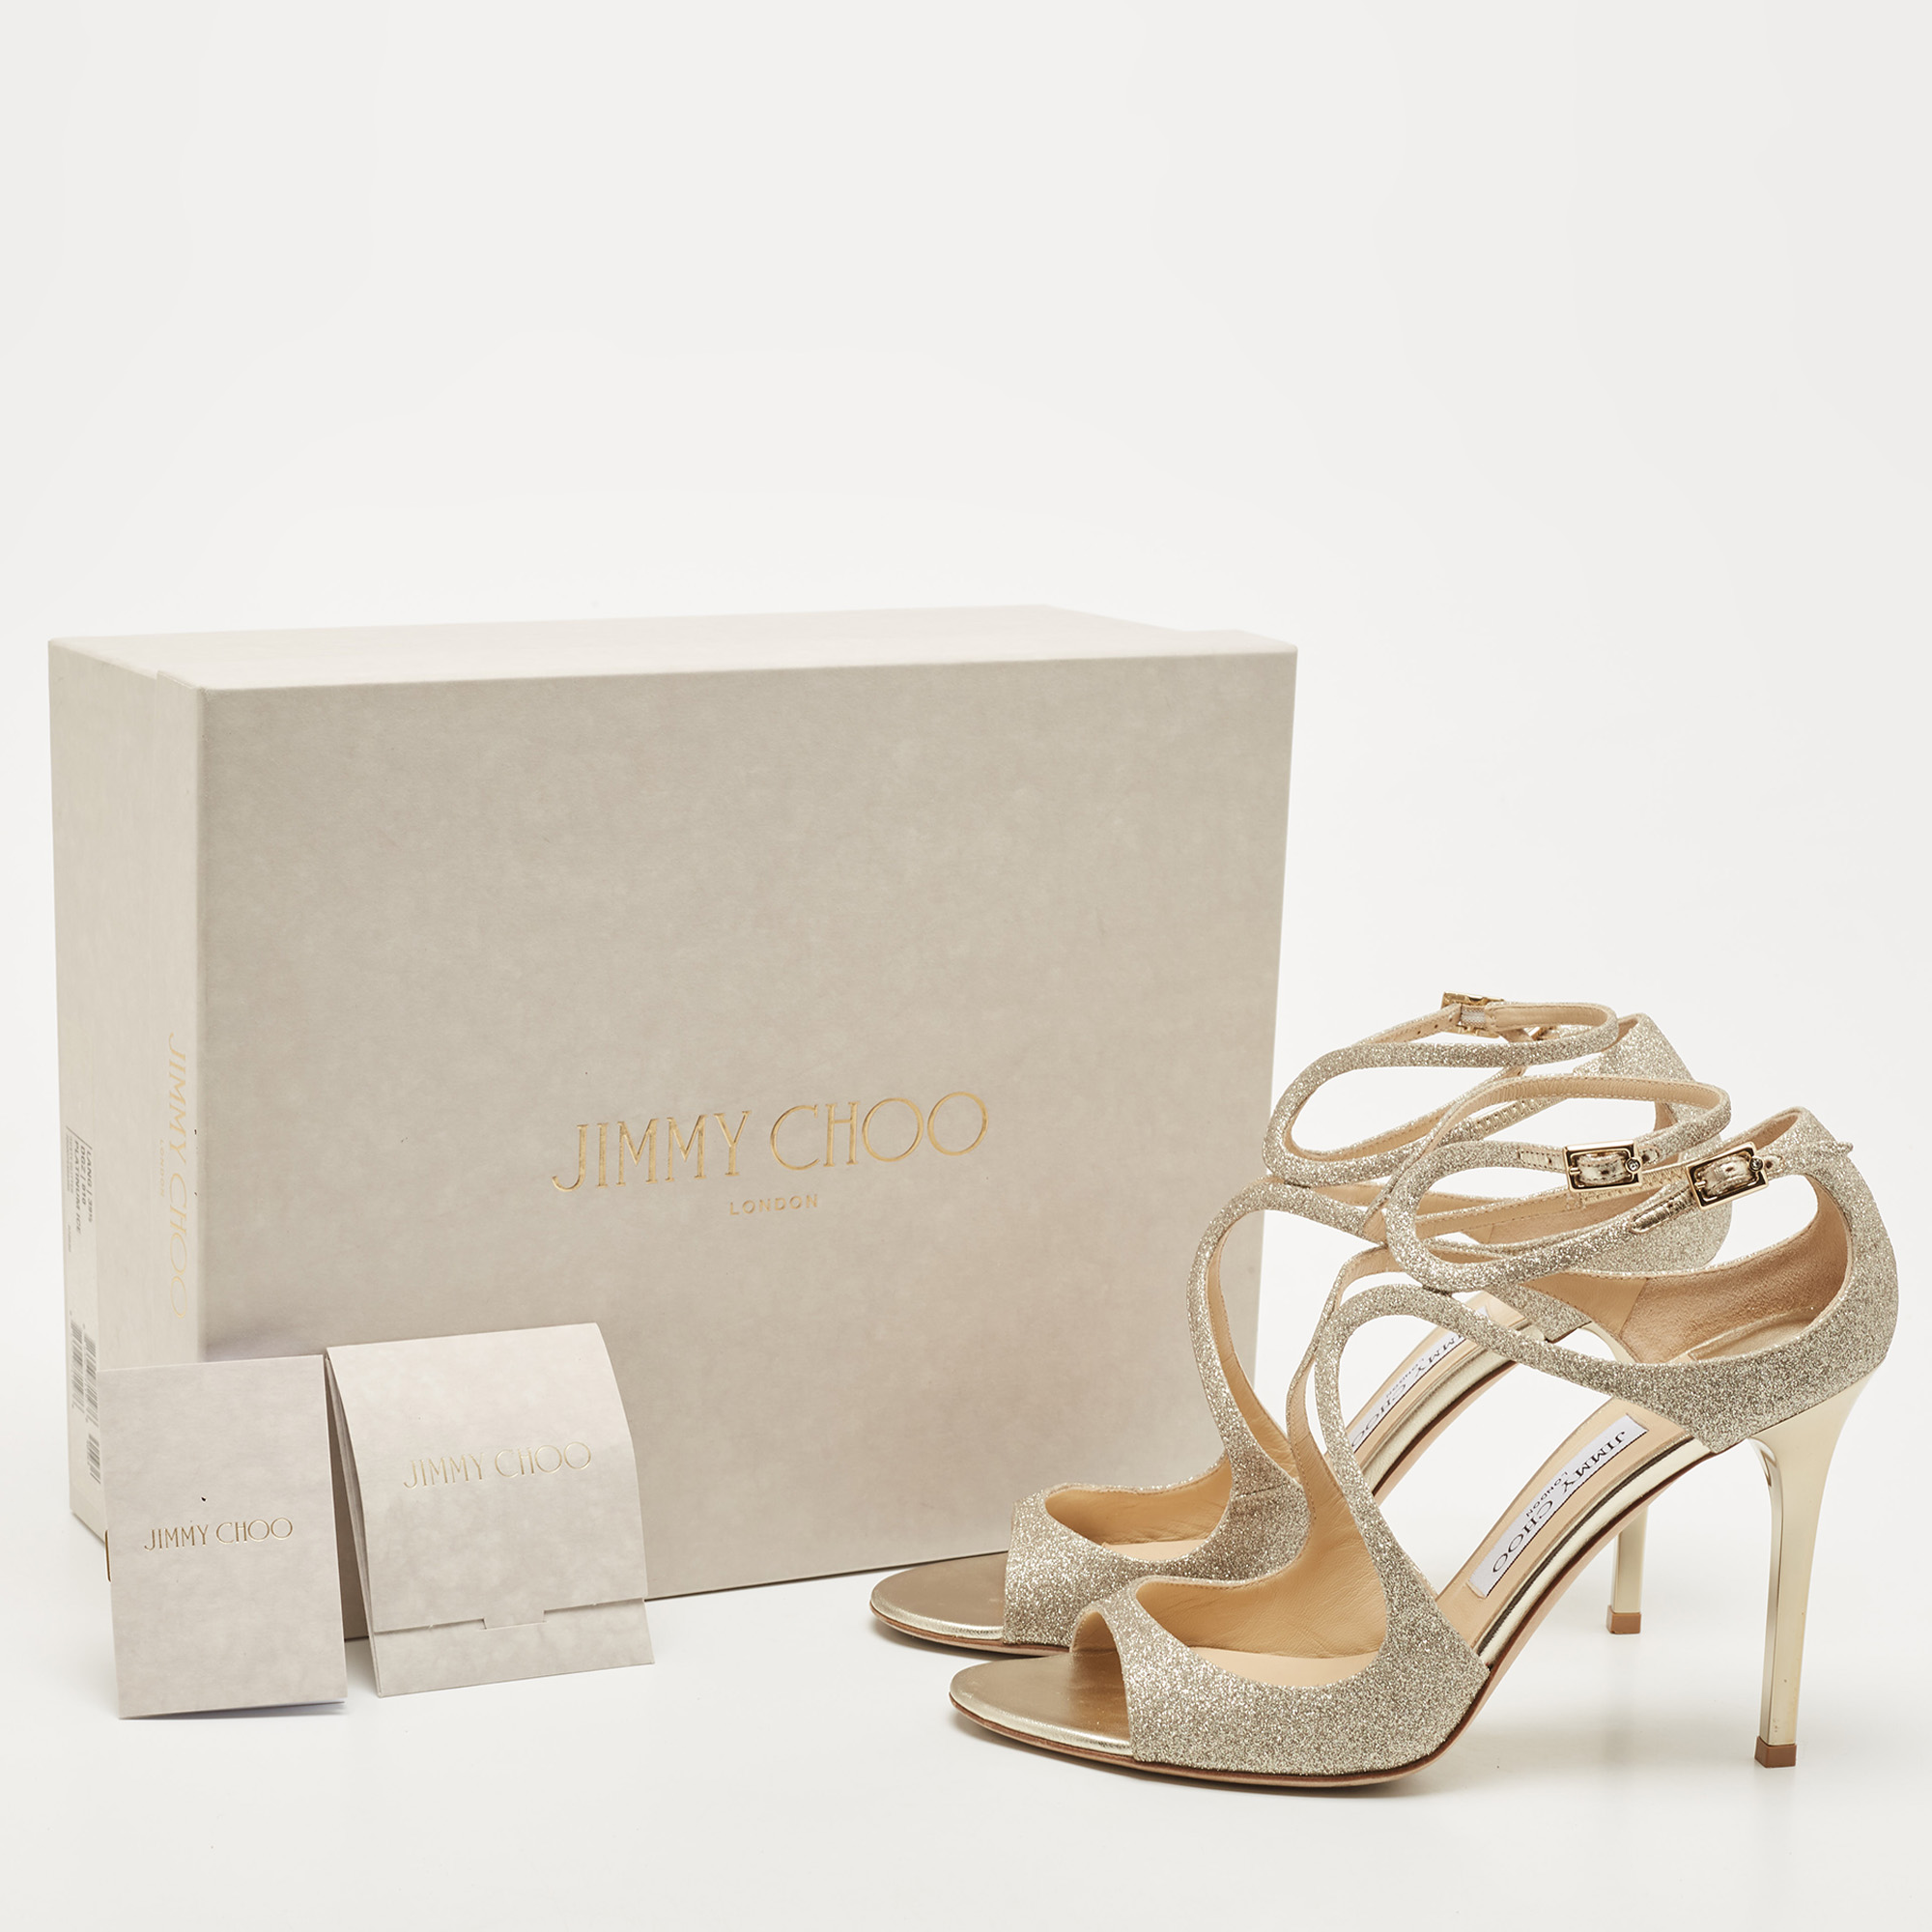 Jimmy Choo Silver Glitter And Leather Lang  Sandals Size 39.5